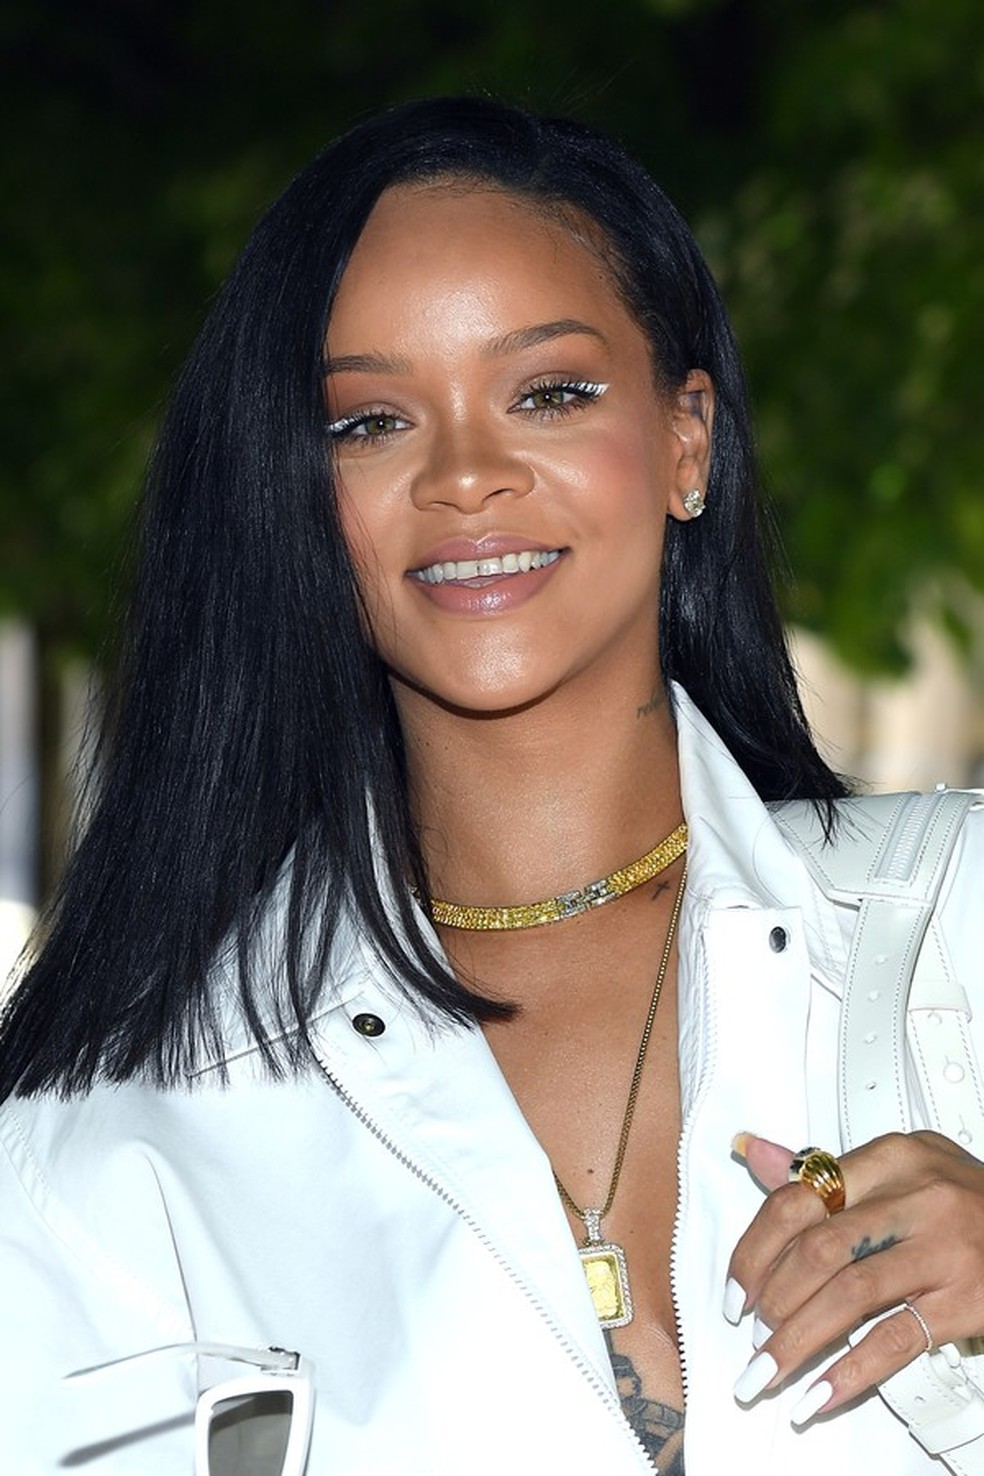 Rihanna (Foto: Getty Images) — Foto: Glamour